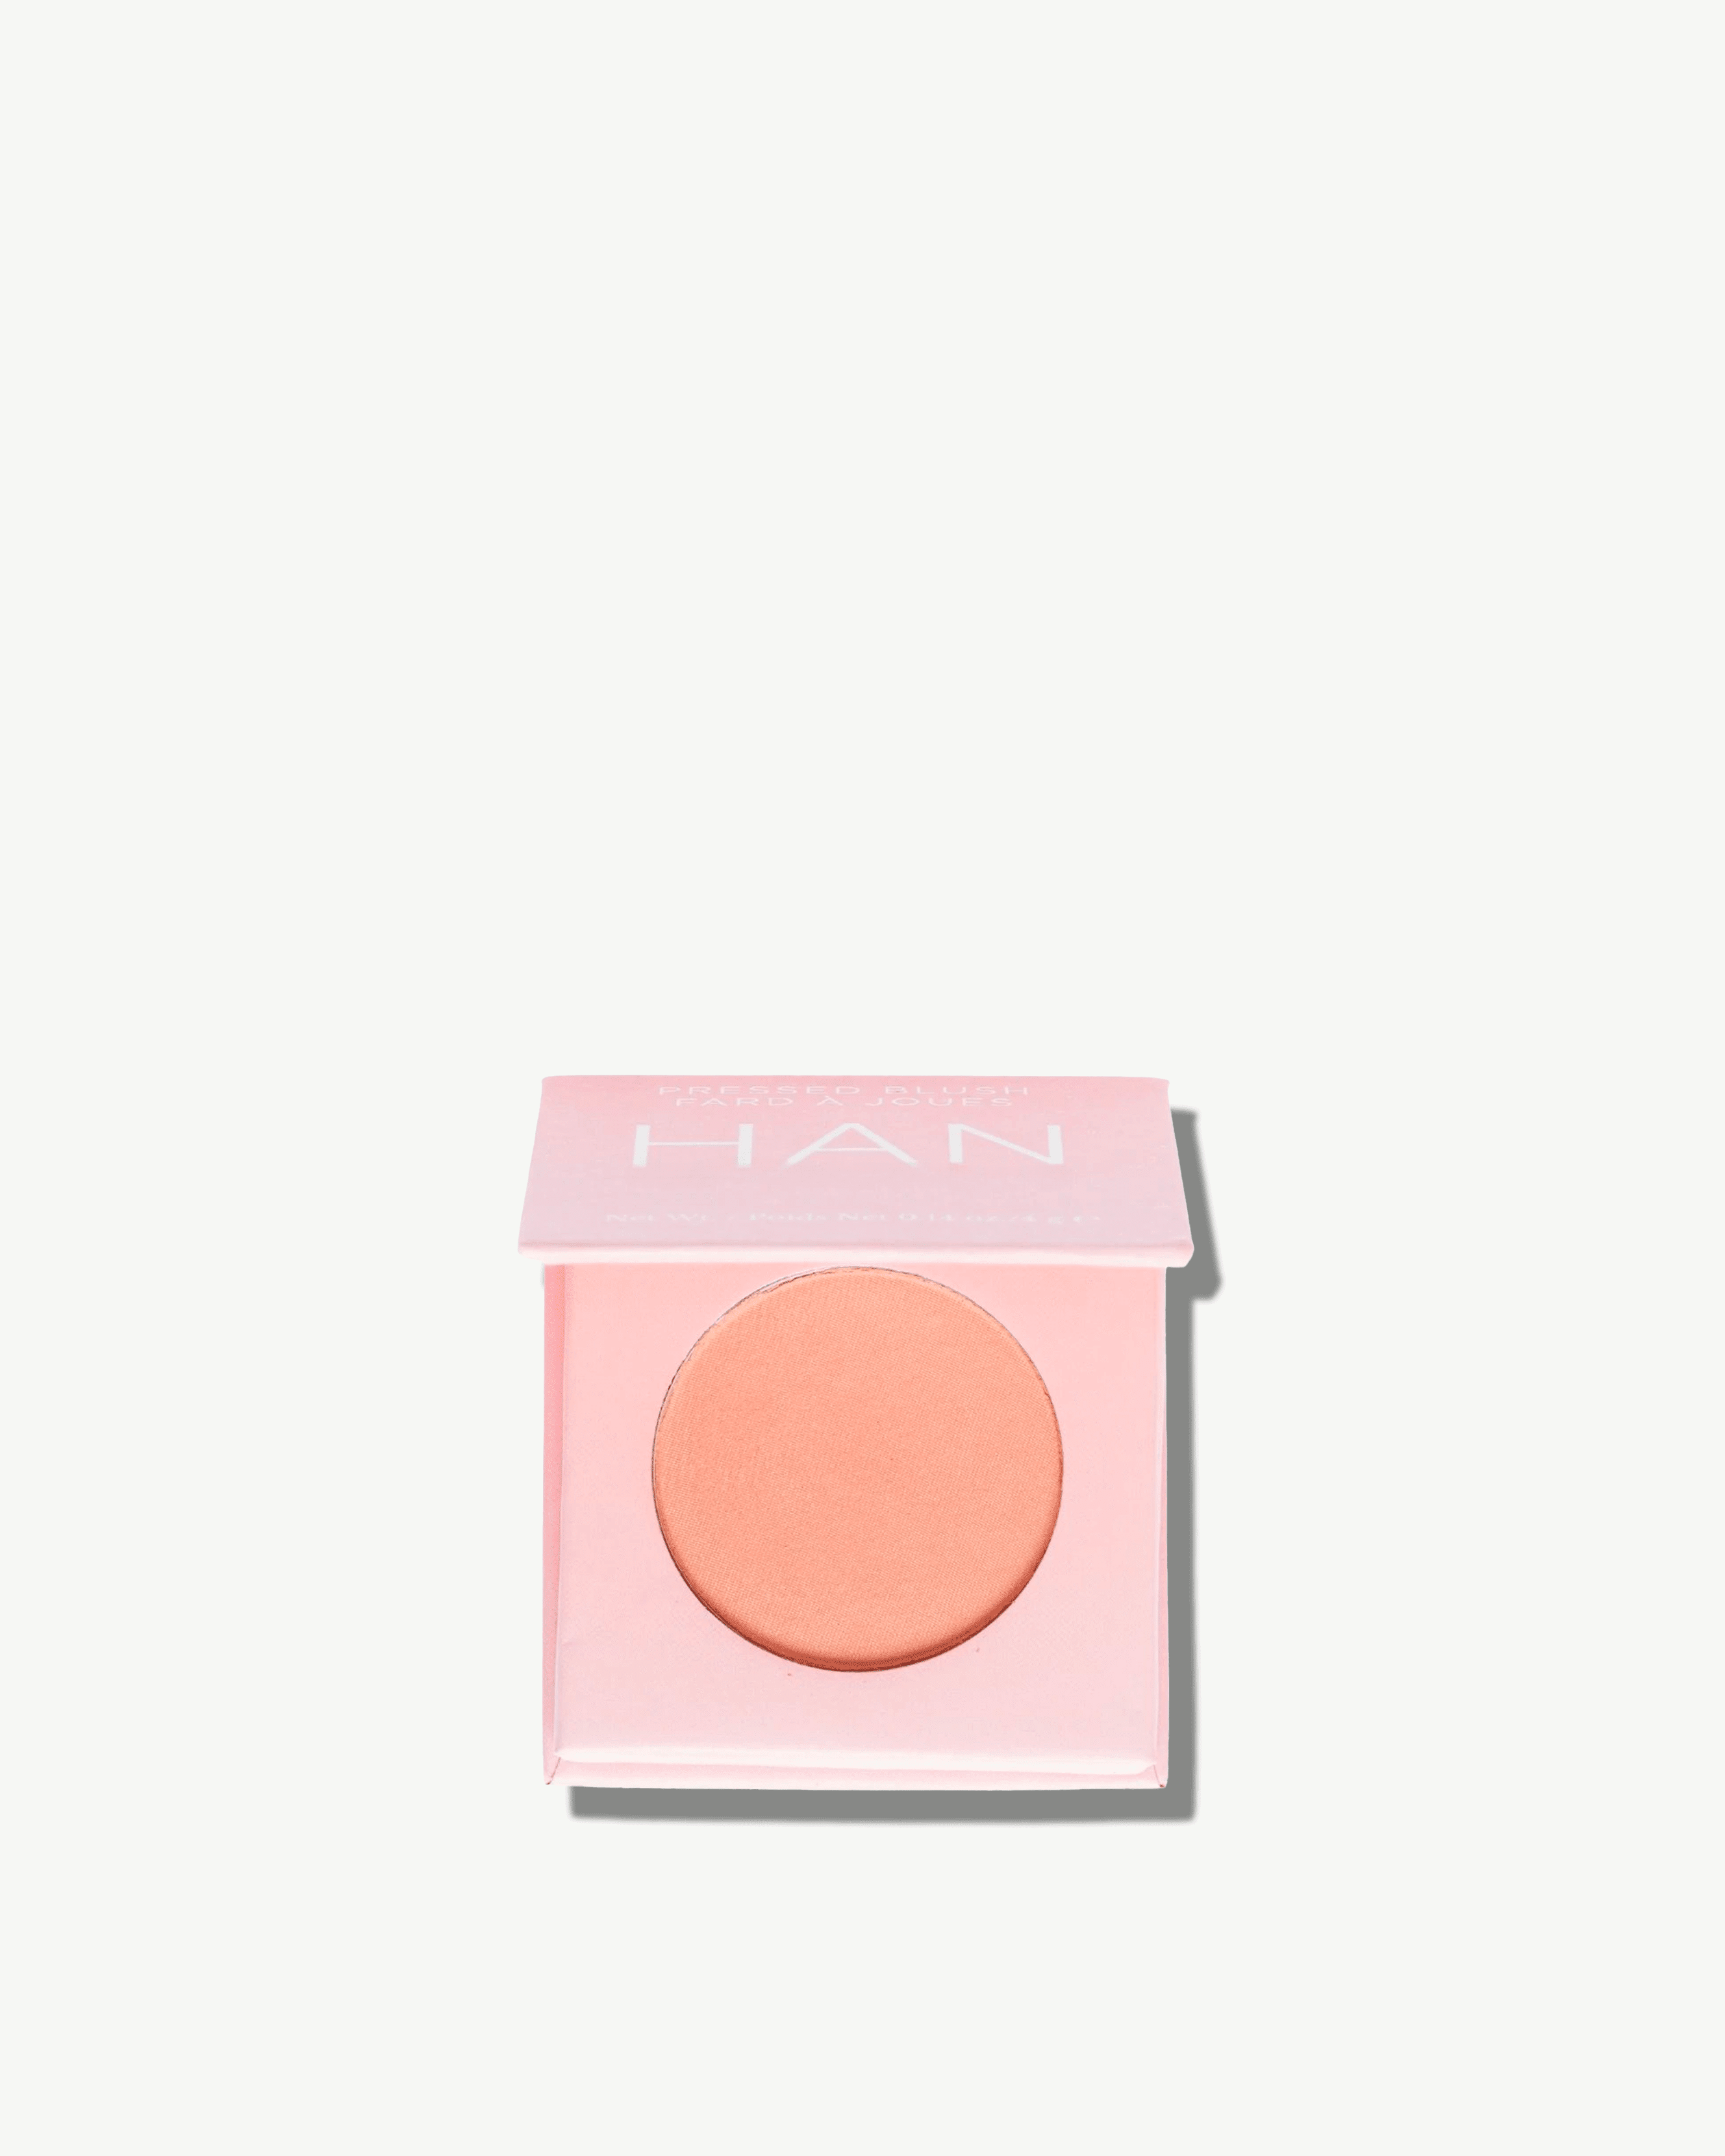 Glory (peachy-beige with subtle shimmer)